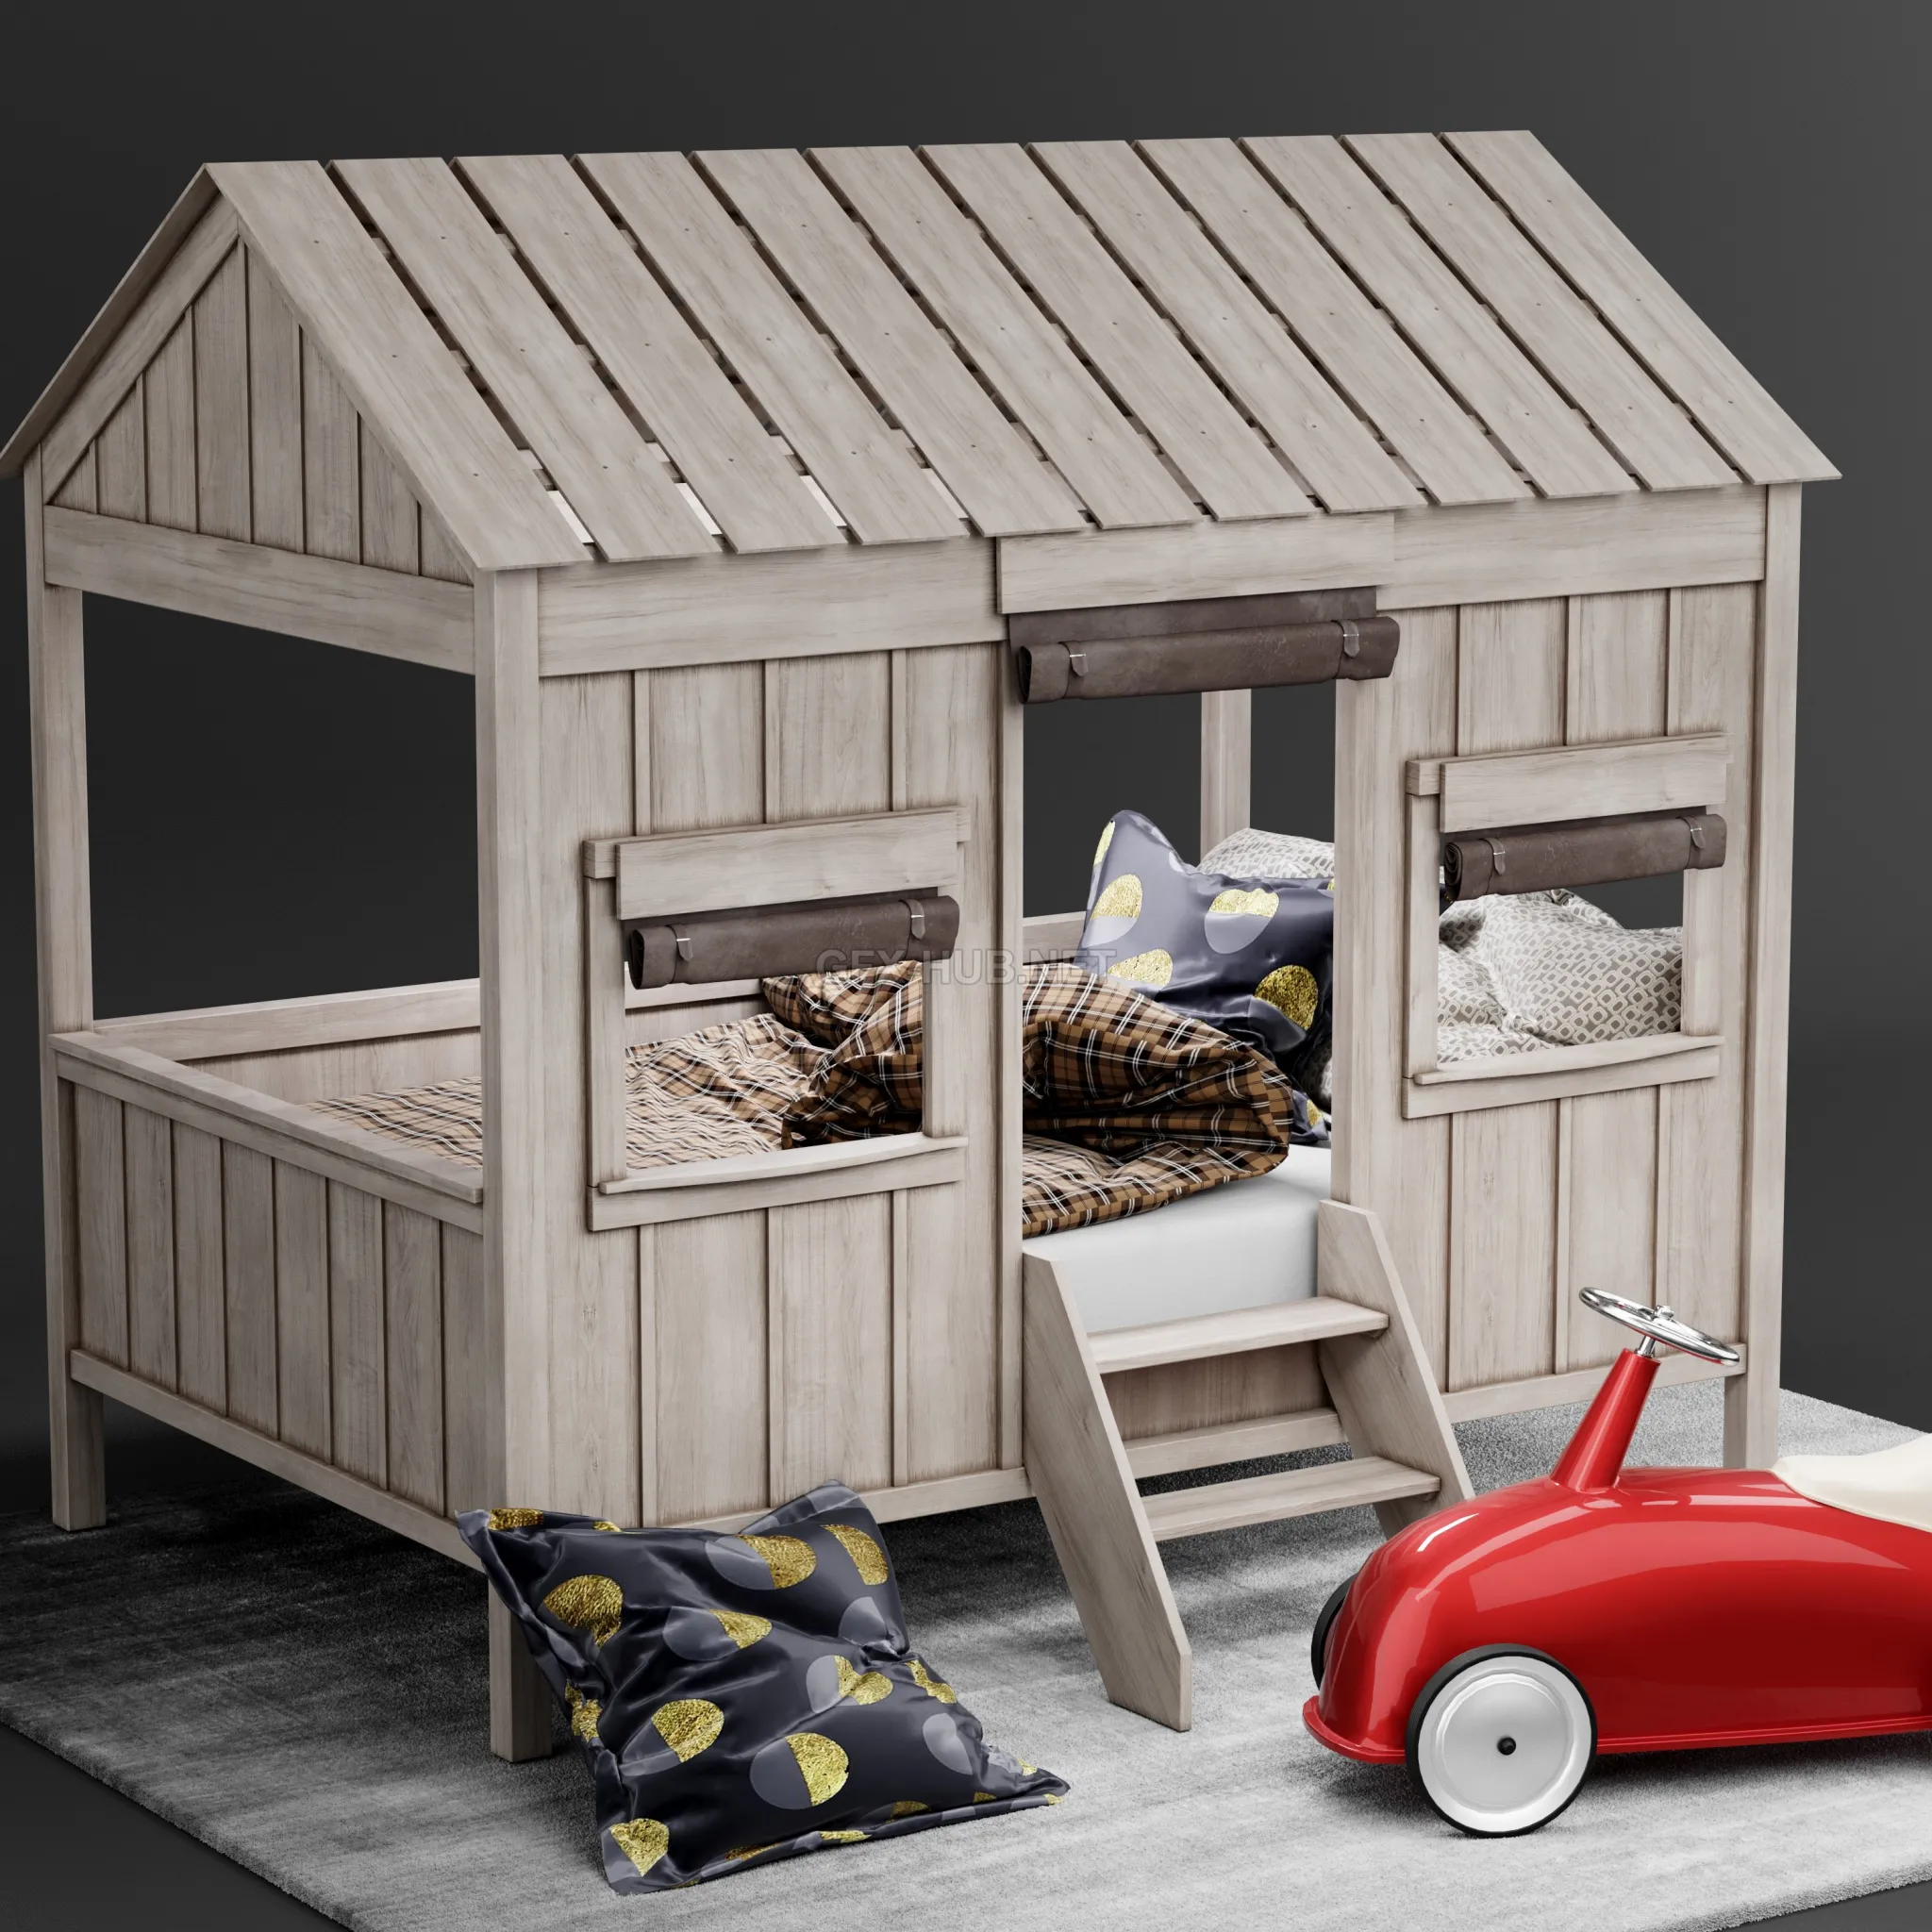 FURNITURE 3D MODELS – Baby house